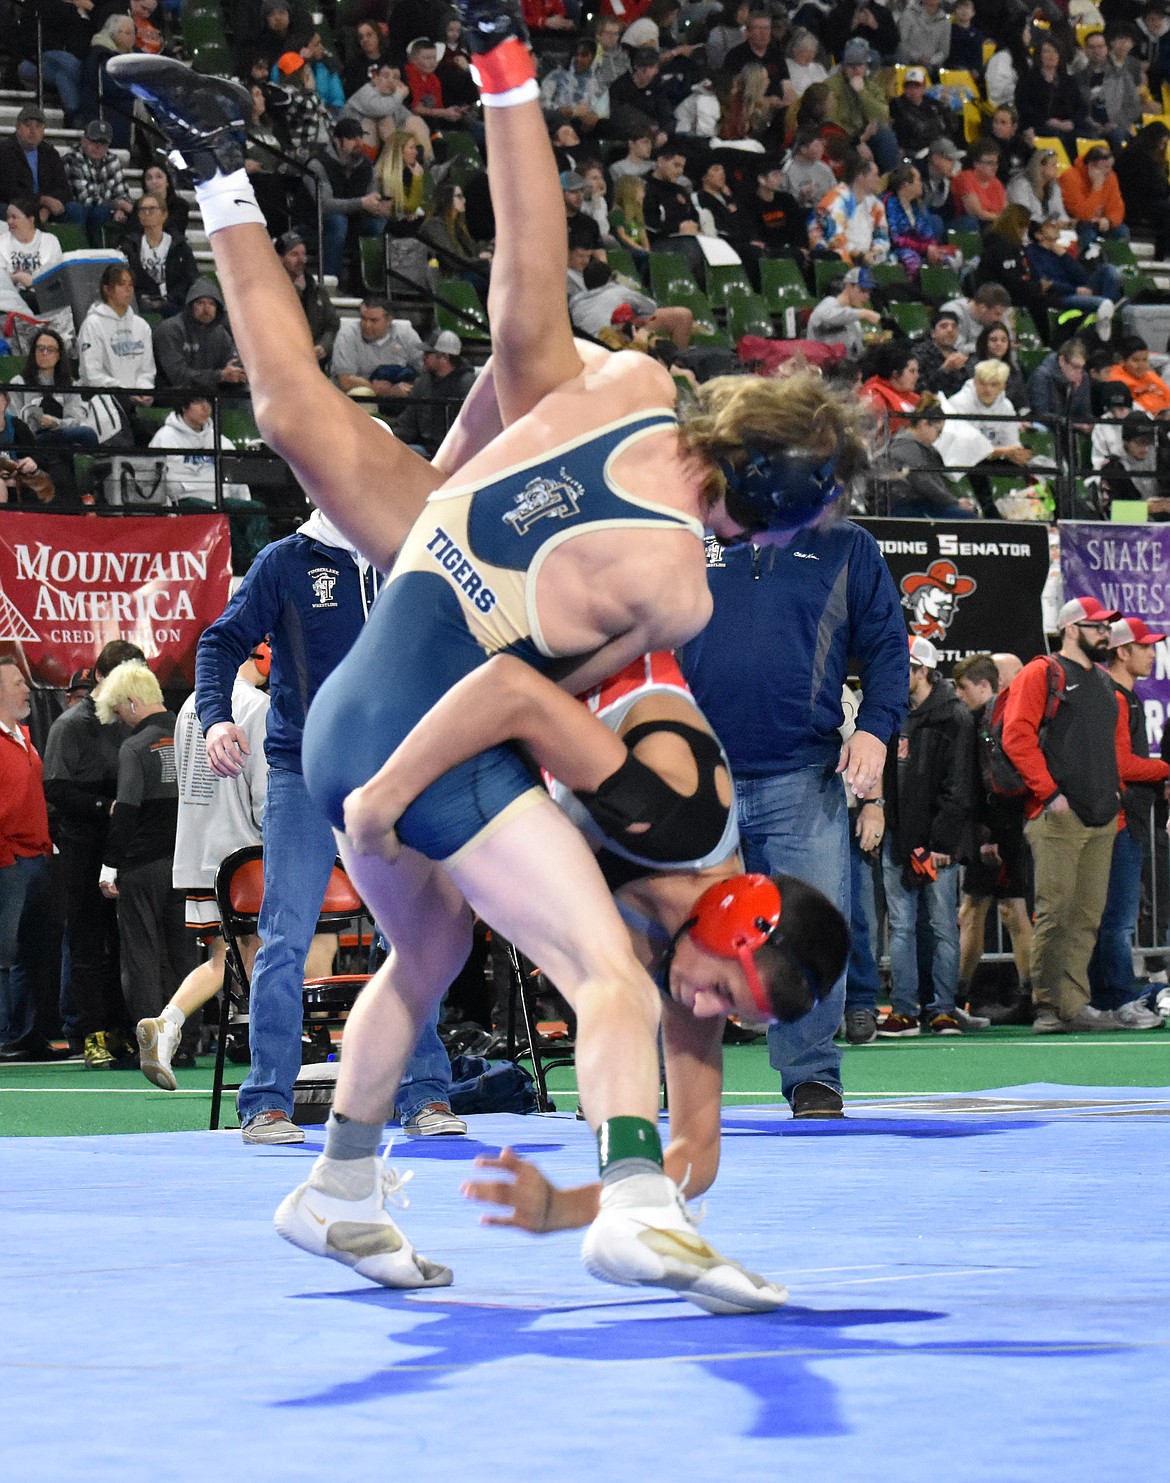 Photo by MOLLY MASON
Stryker Huston, left, of Timberlake, won two matches Friday and advanced to the 3A semifinals at 120 pounds at the state high school wrestling tournaments at Holt Arena in Pocatello.